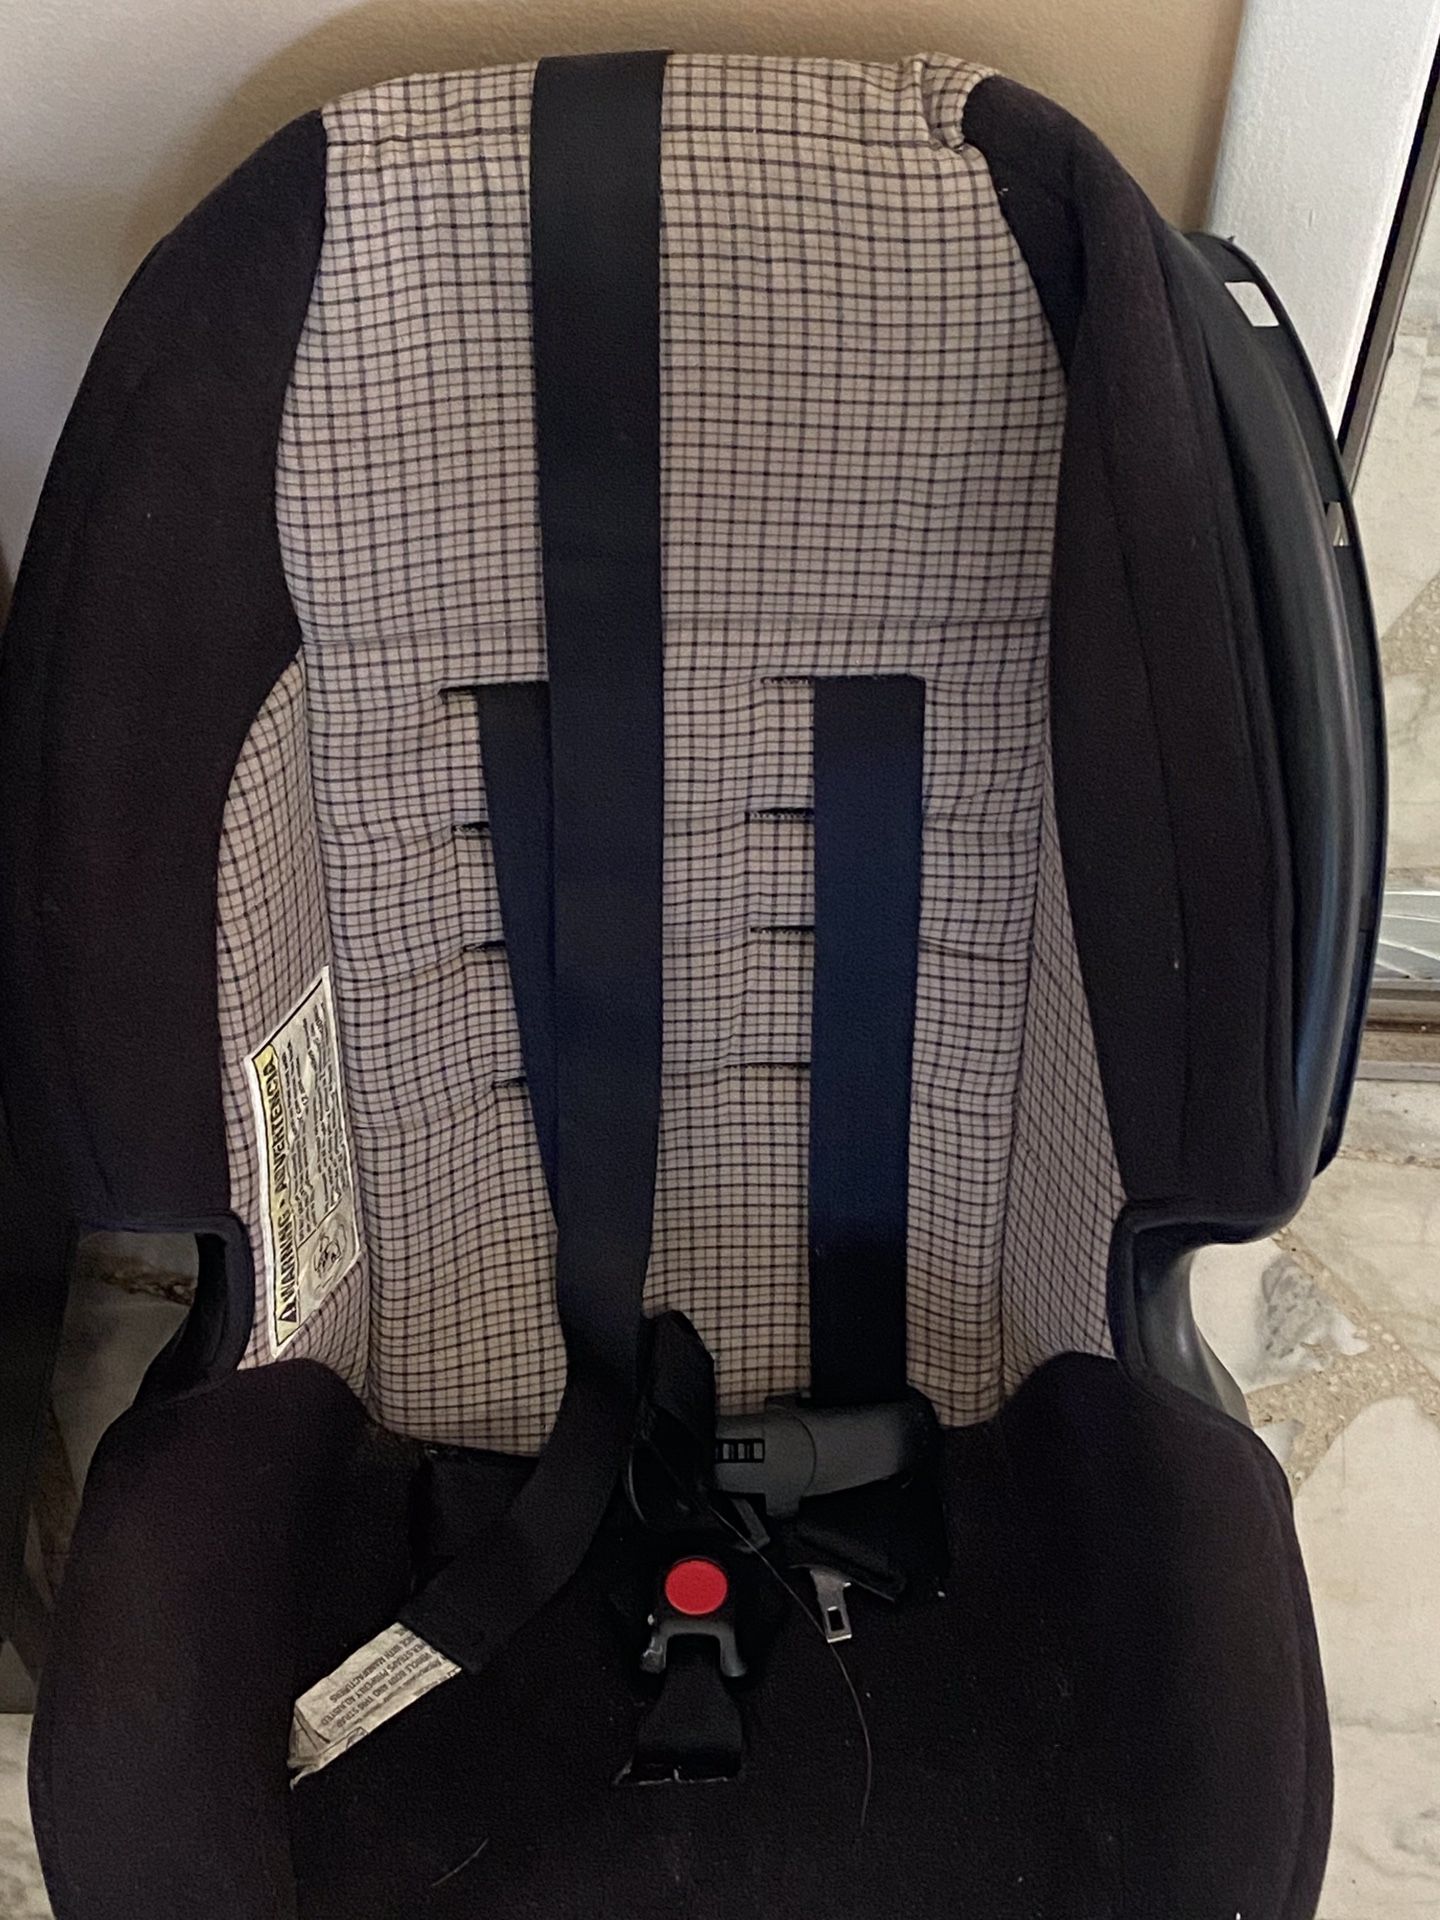 CLEAN, lightly-used Stylish Kids’ Car Seat